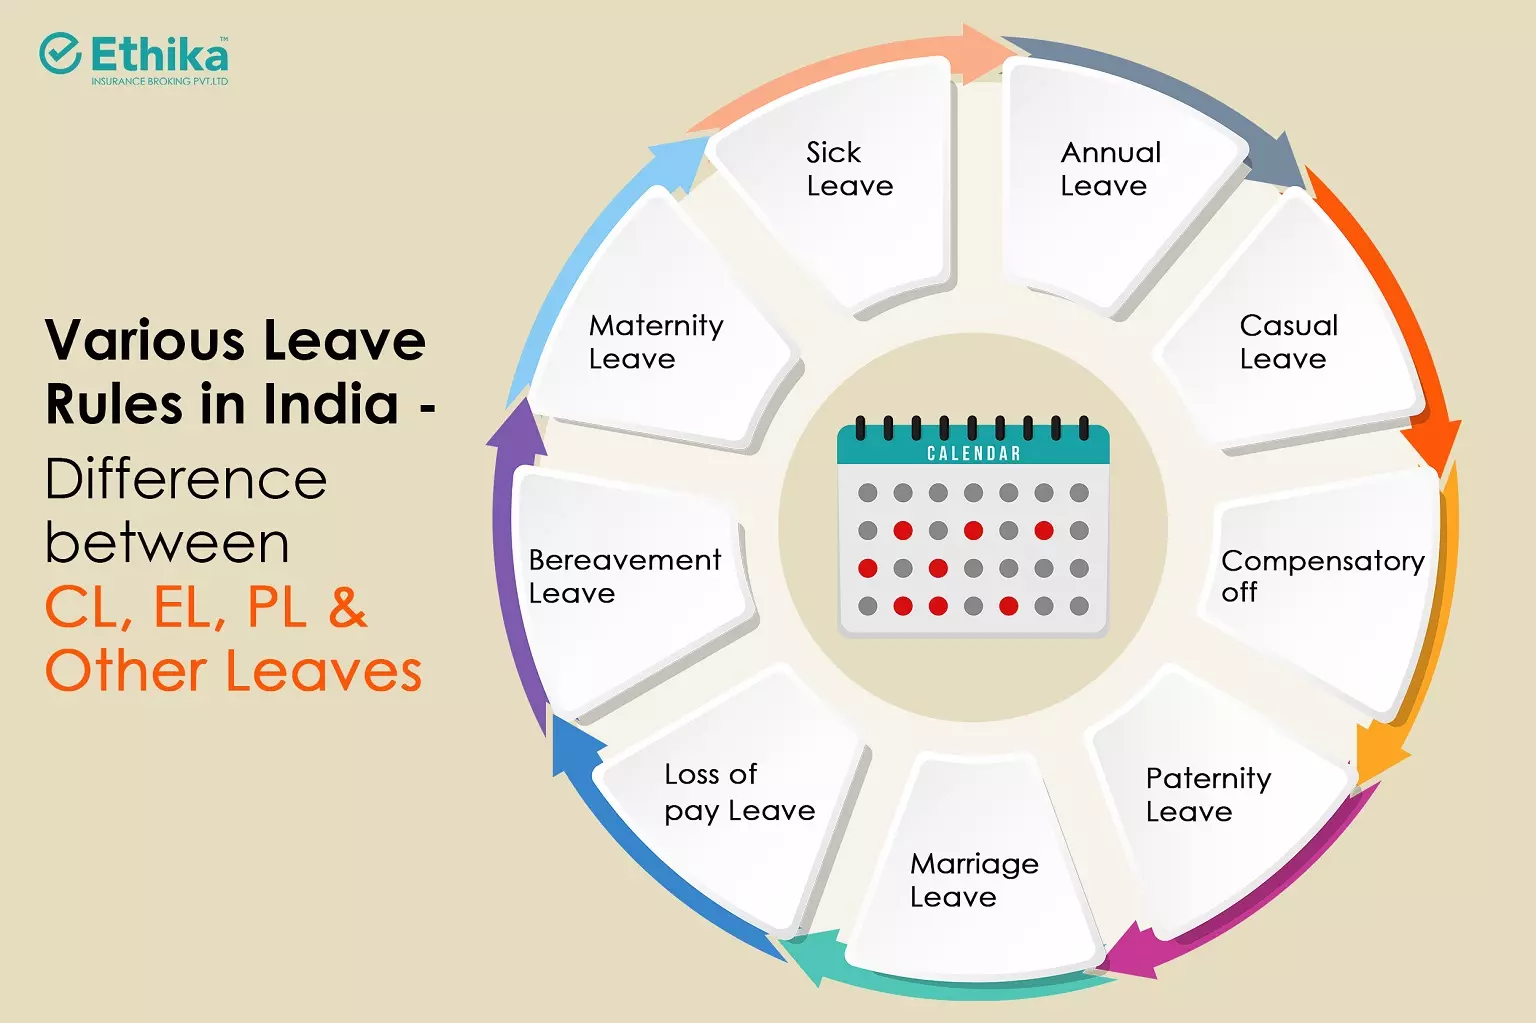 Various Leave Rules in India - Difference Between CL, EL, PL & Other Leaves